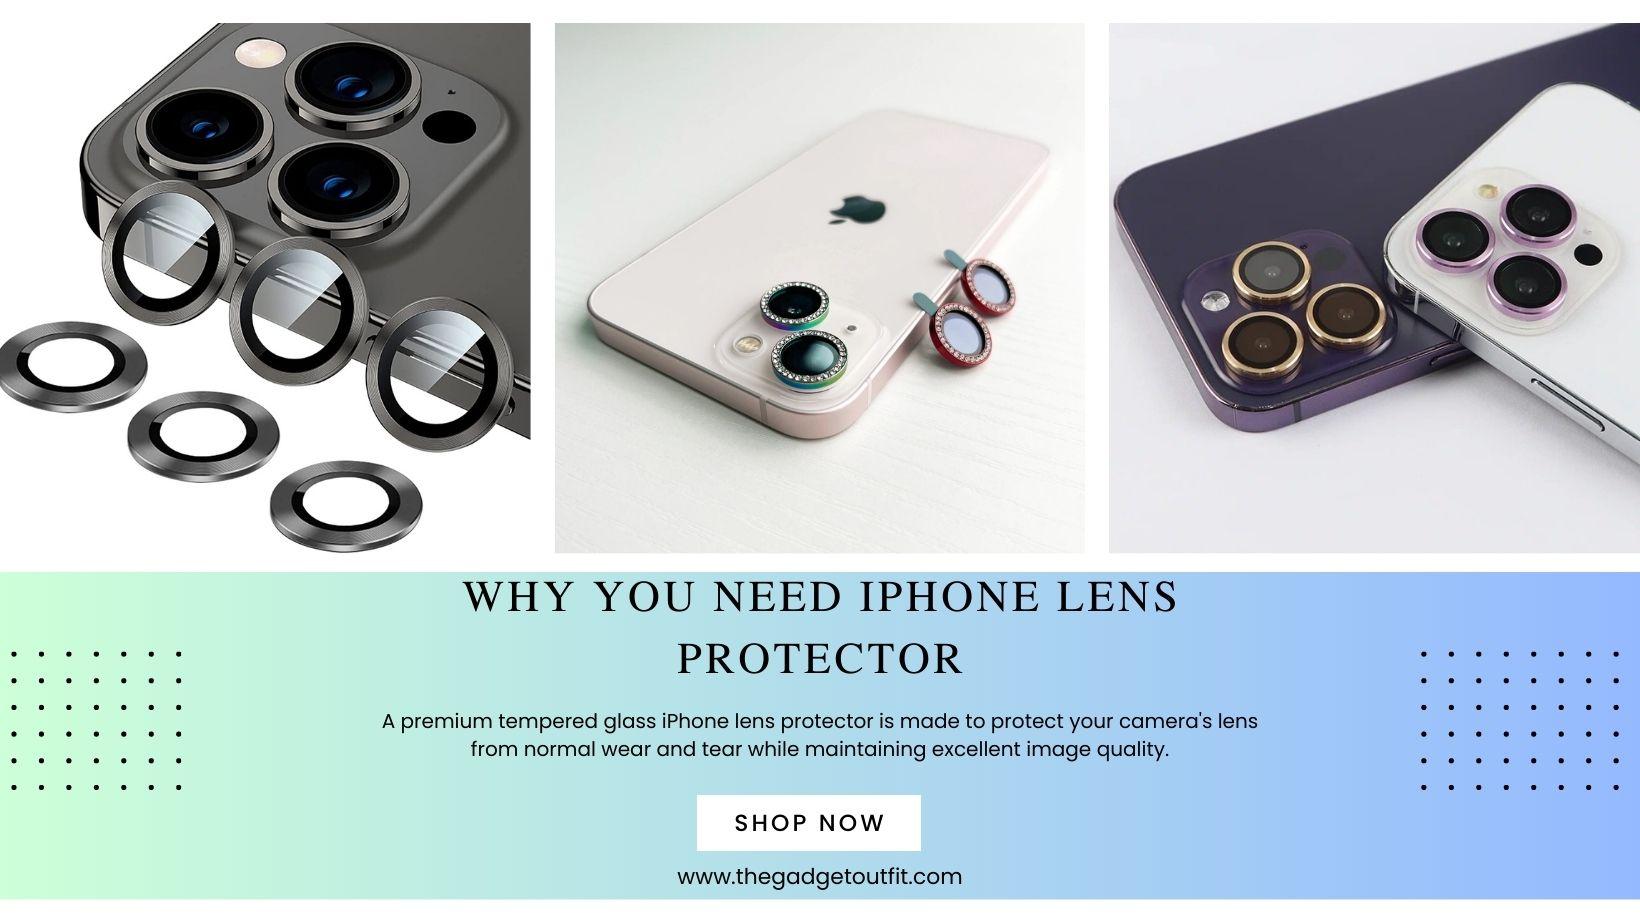 Why You Need iPhone Lens Protector